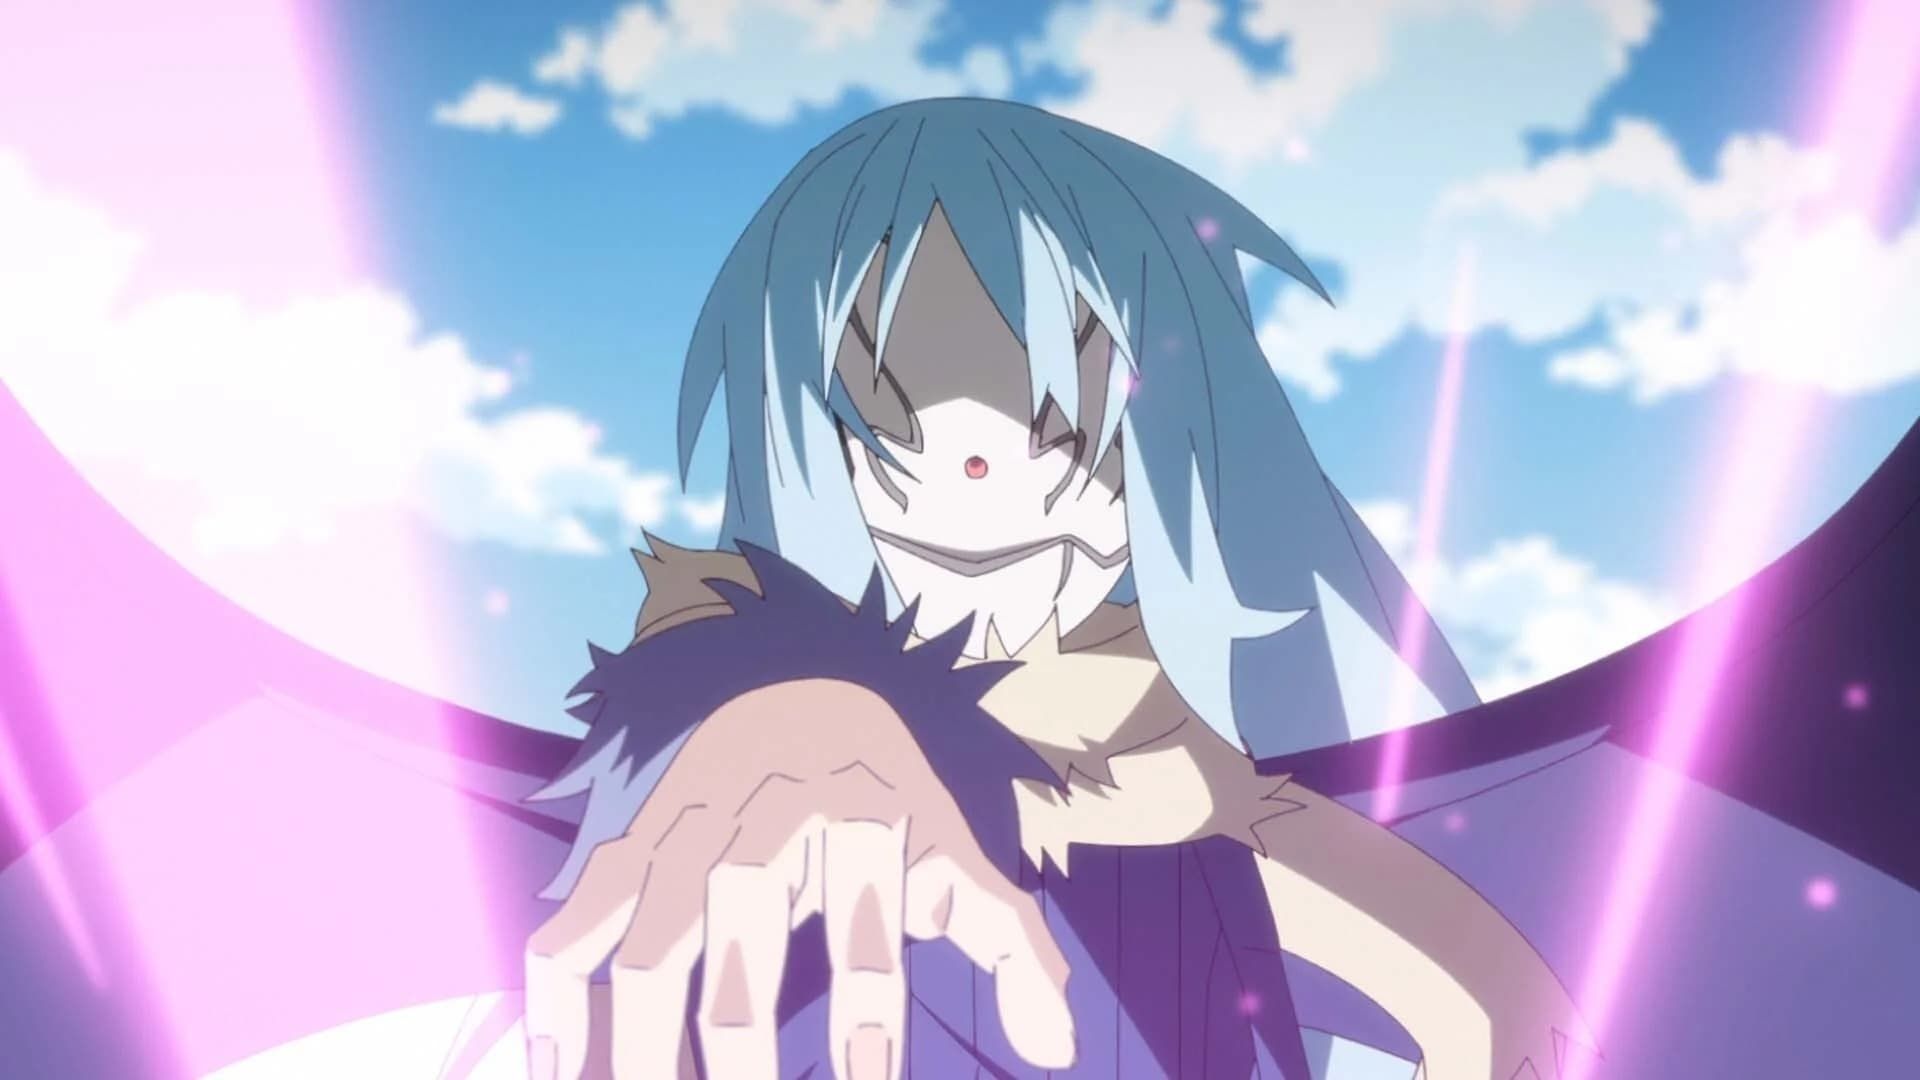 That Time I Got Reincarnated as a Slime background